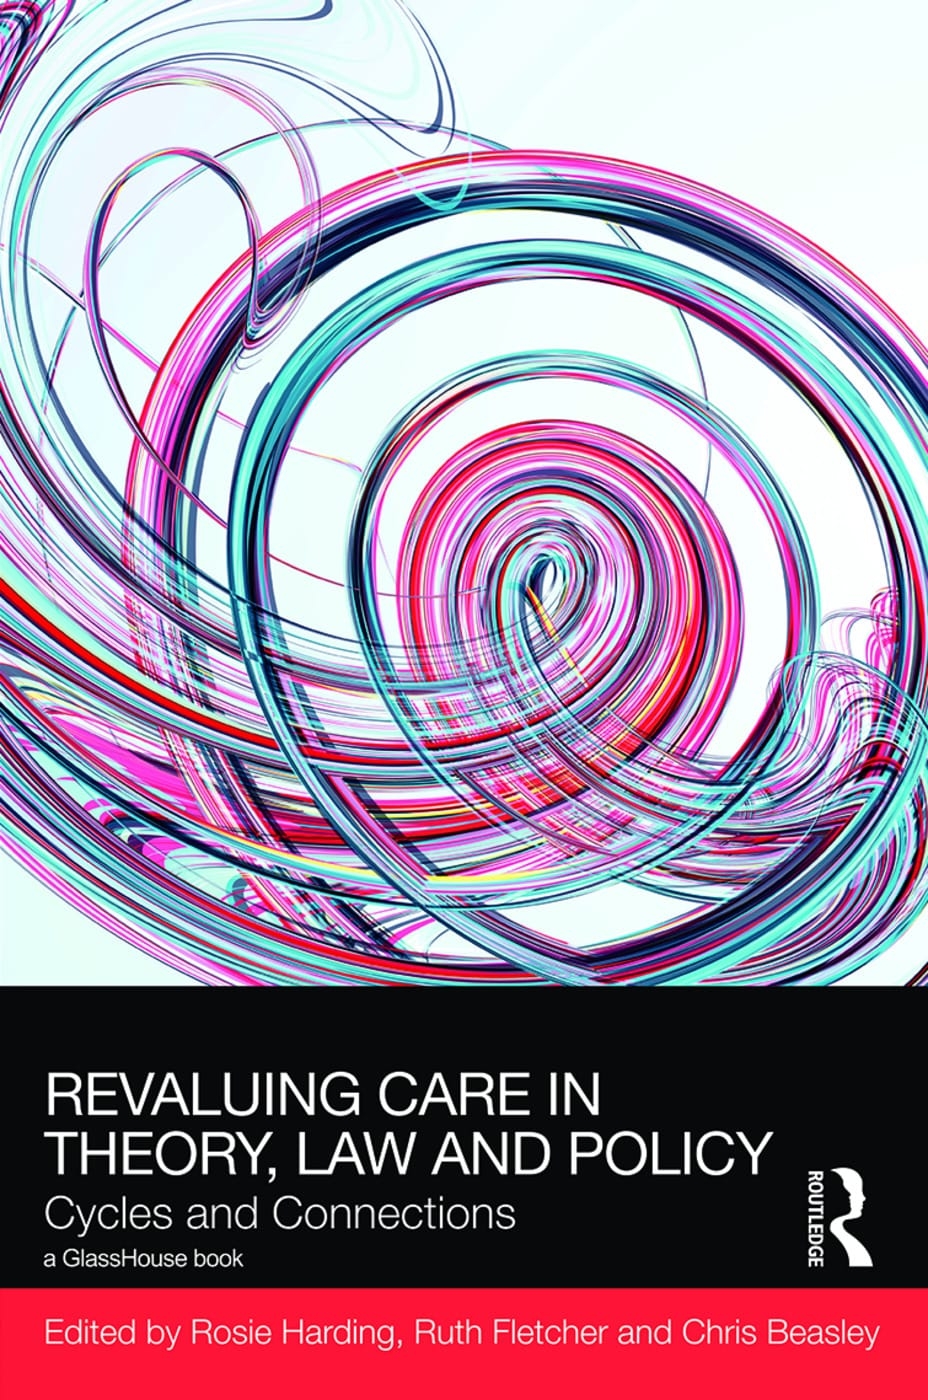 Revaluing Care in Theory, Law and Policy: Cycles and Connections